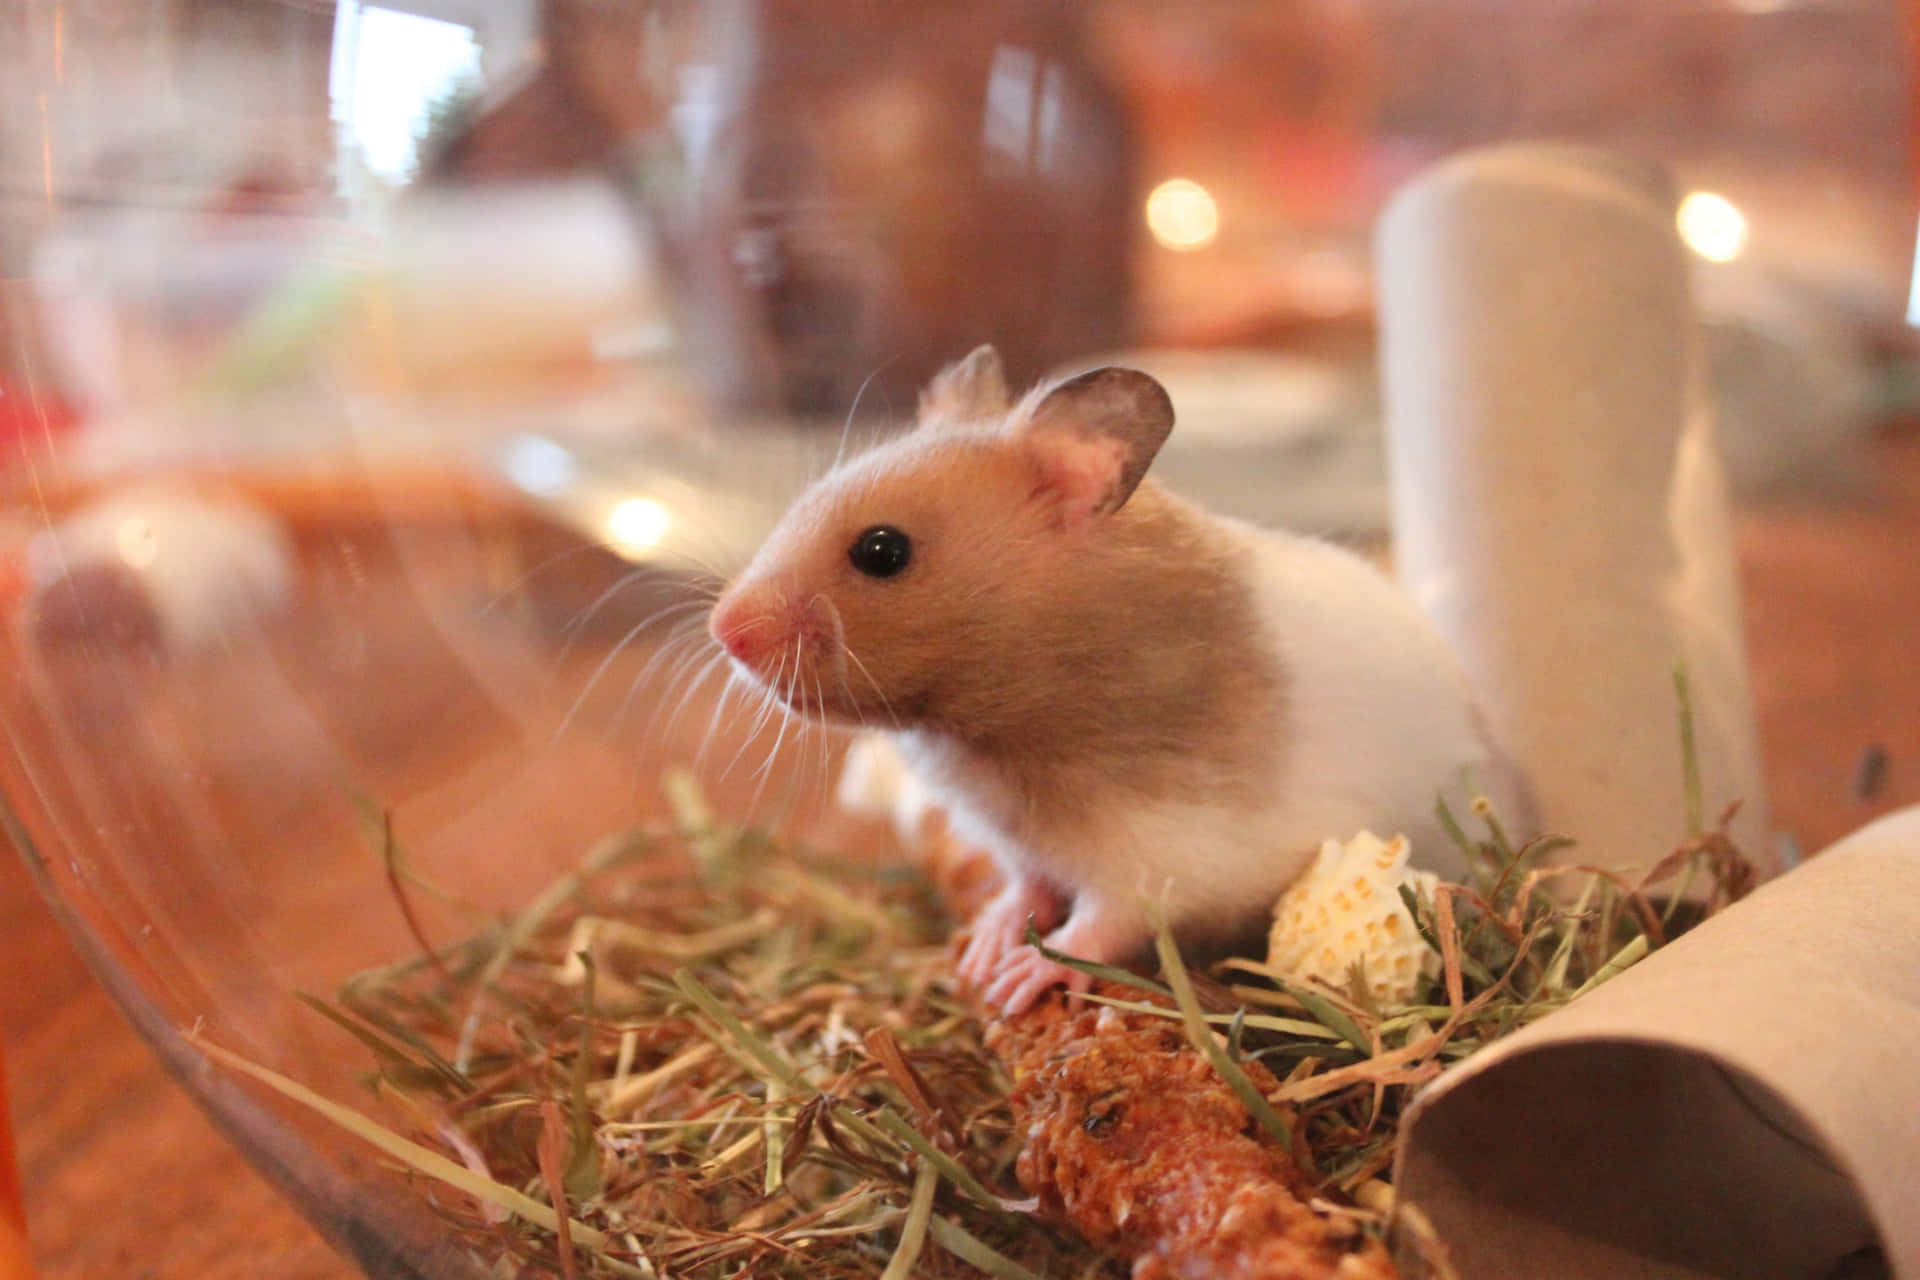 An Adorable Hamster Squeaks For Attention